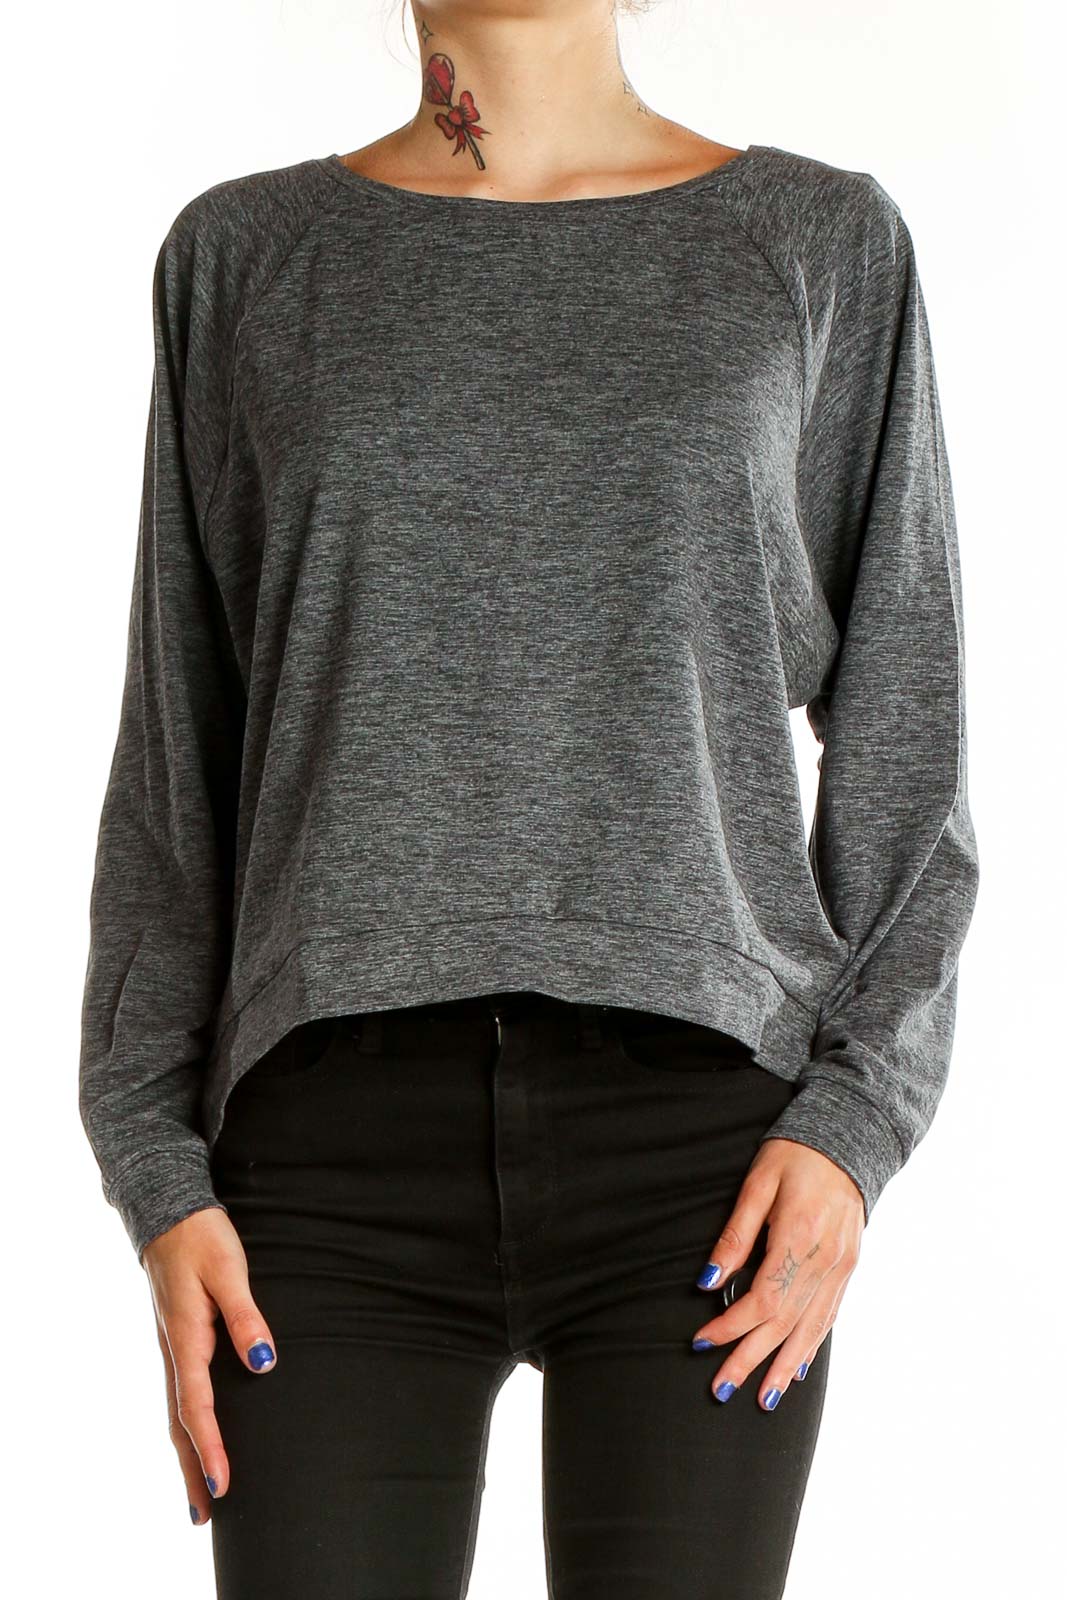 Gray Long Sleeve Activewear Top Front